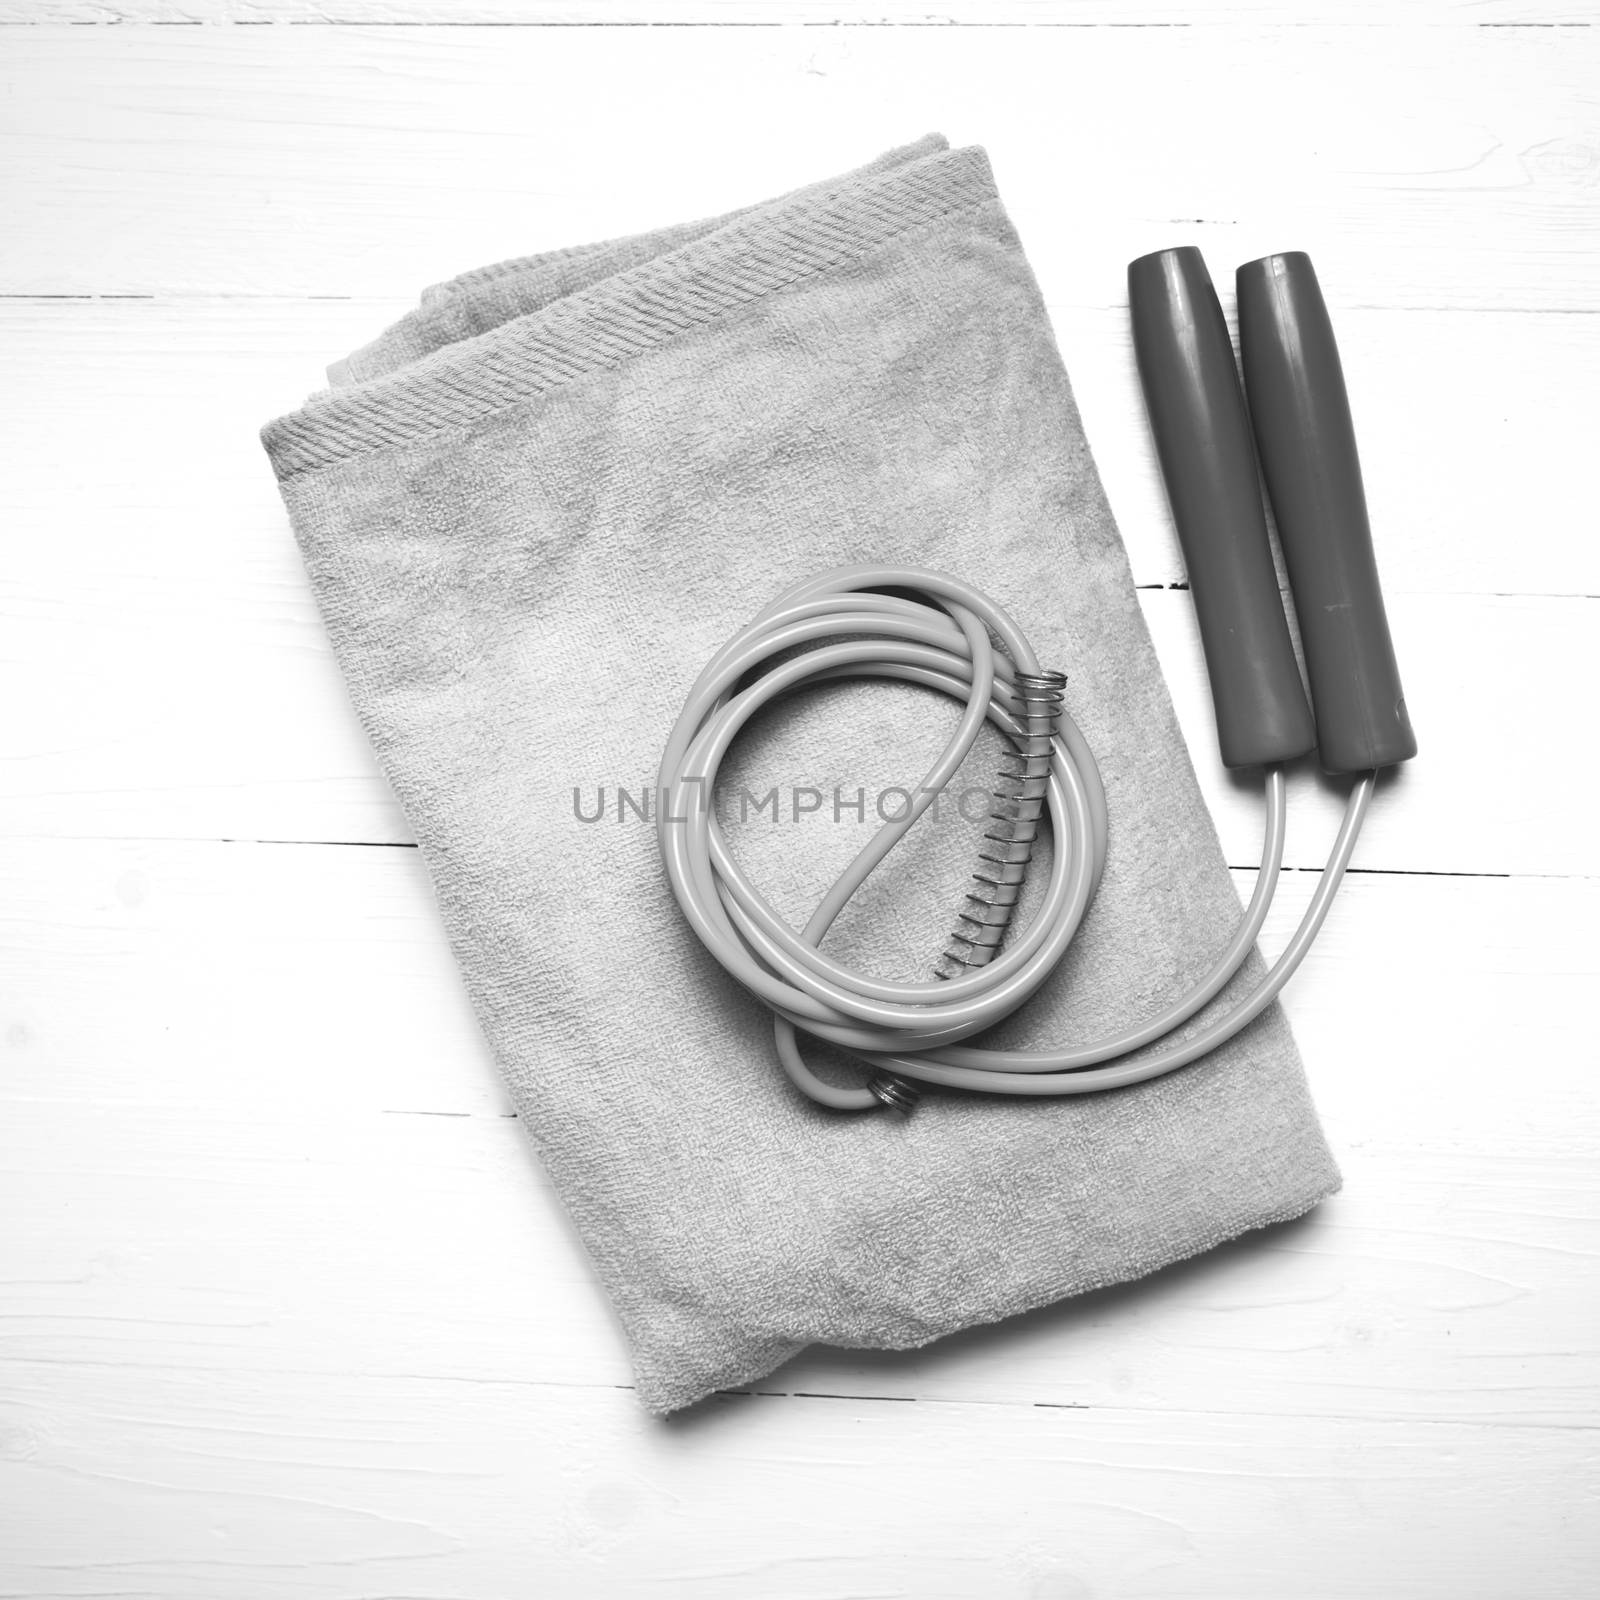 fitness equipment:towel,jumping rope black and white color style by ammza12